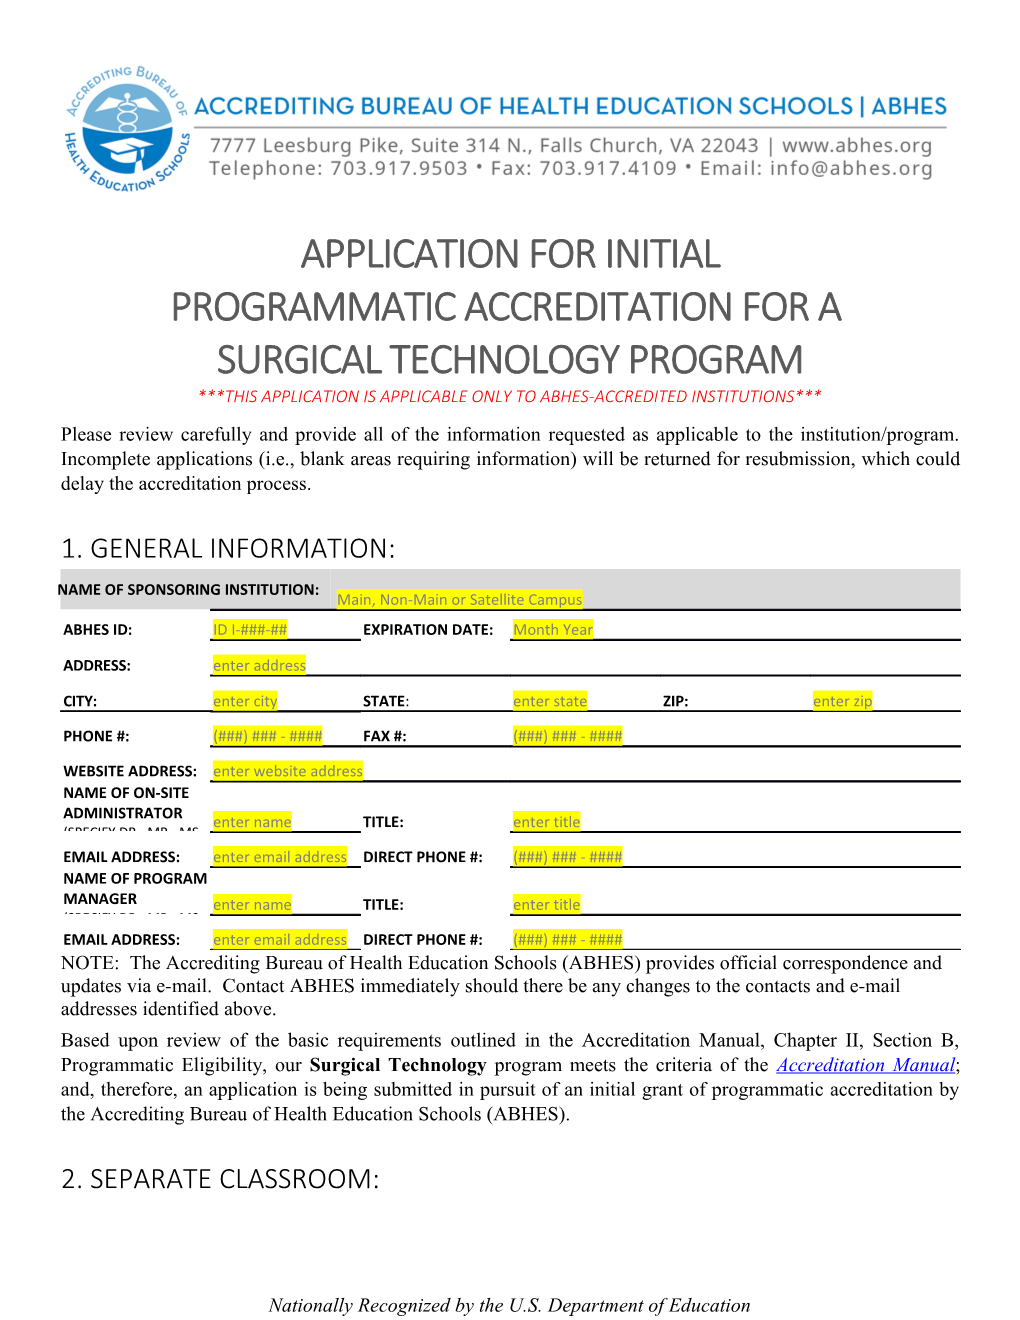 Application for Initial Programmatic Accreditation for a Surgical Technology Program